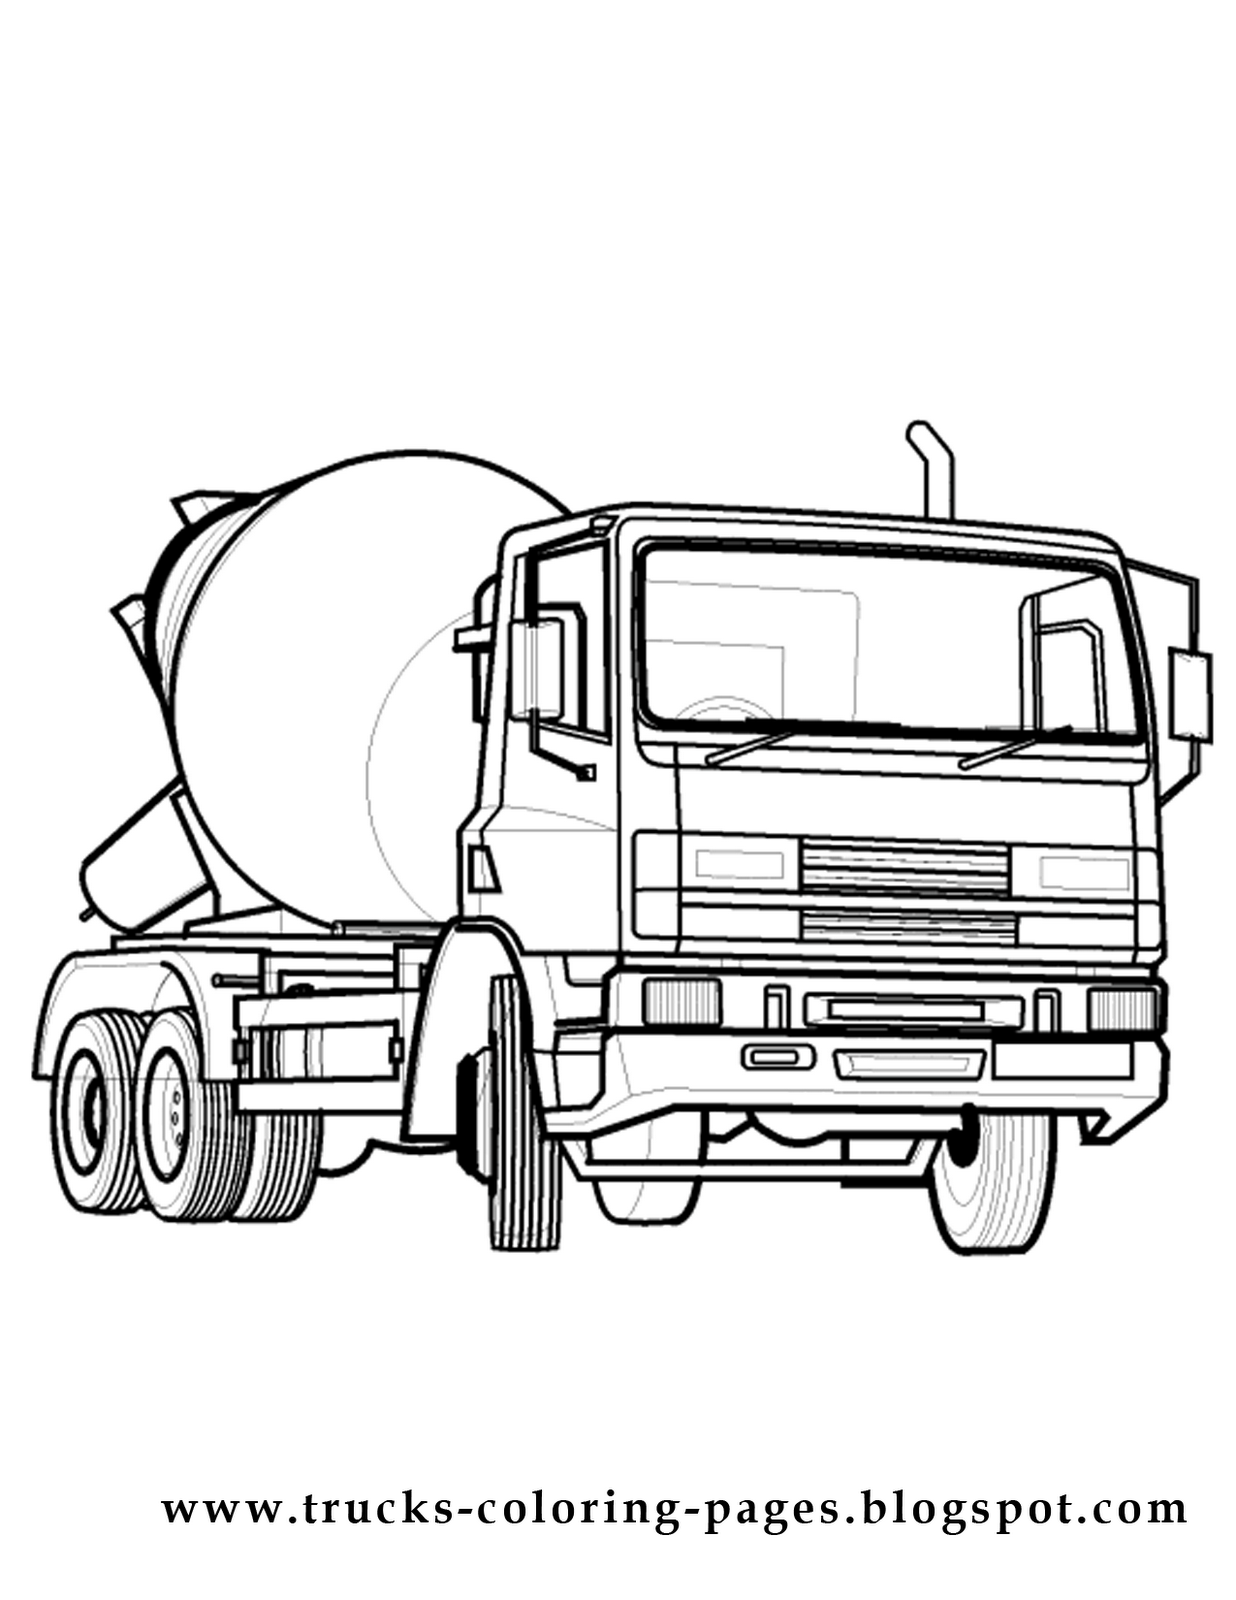  Truck coloring pages | color printing | coloring sheets | #25